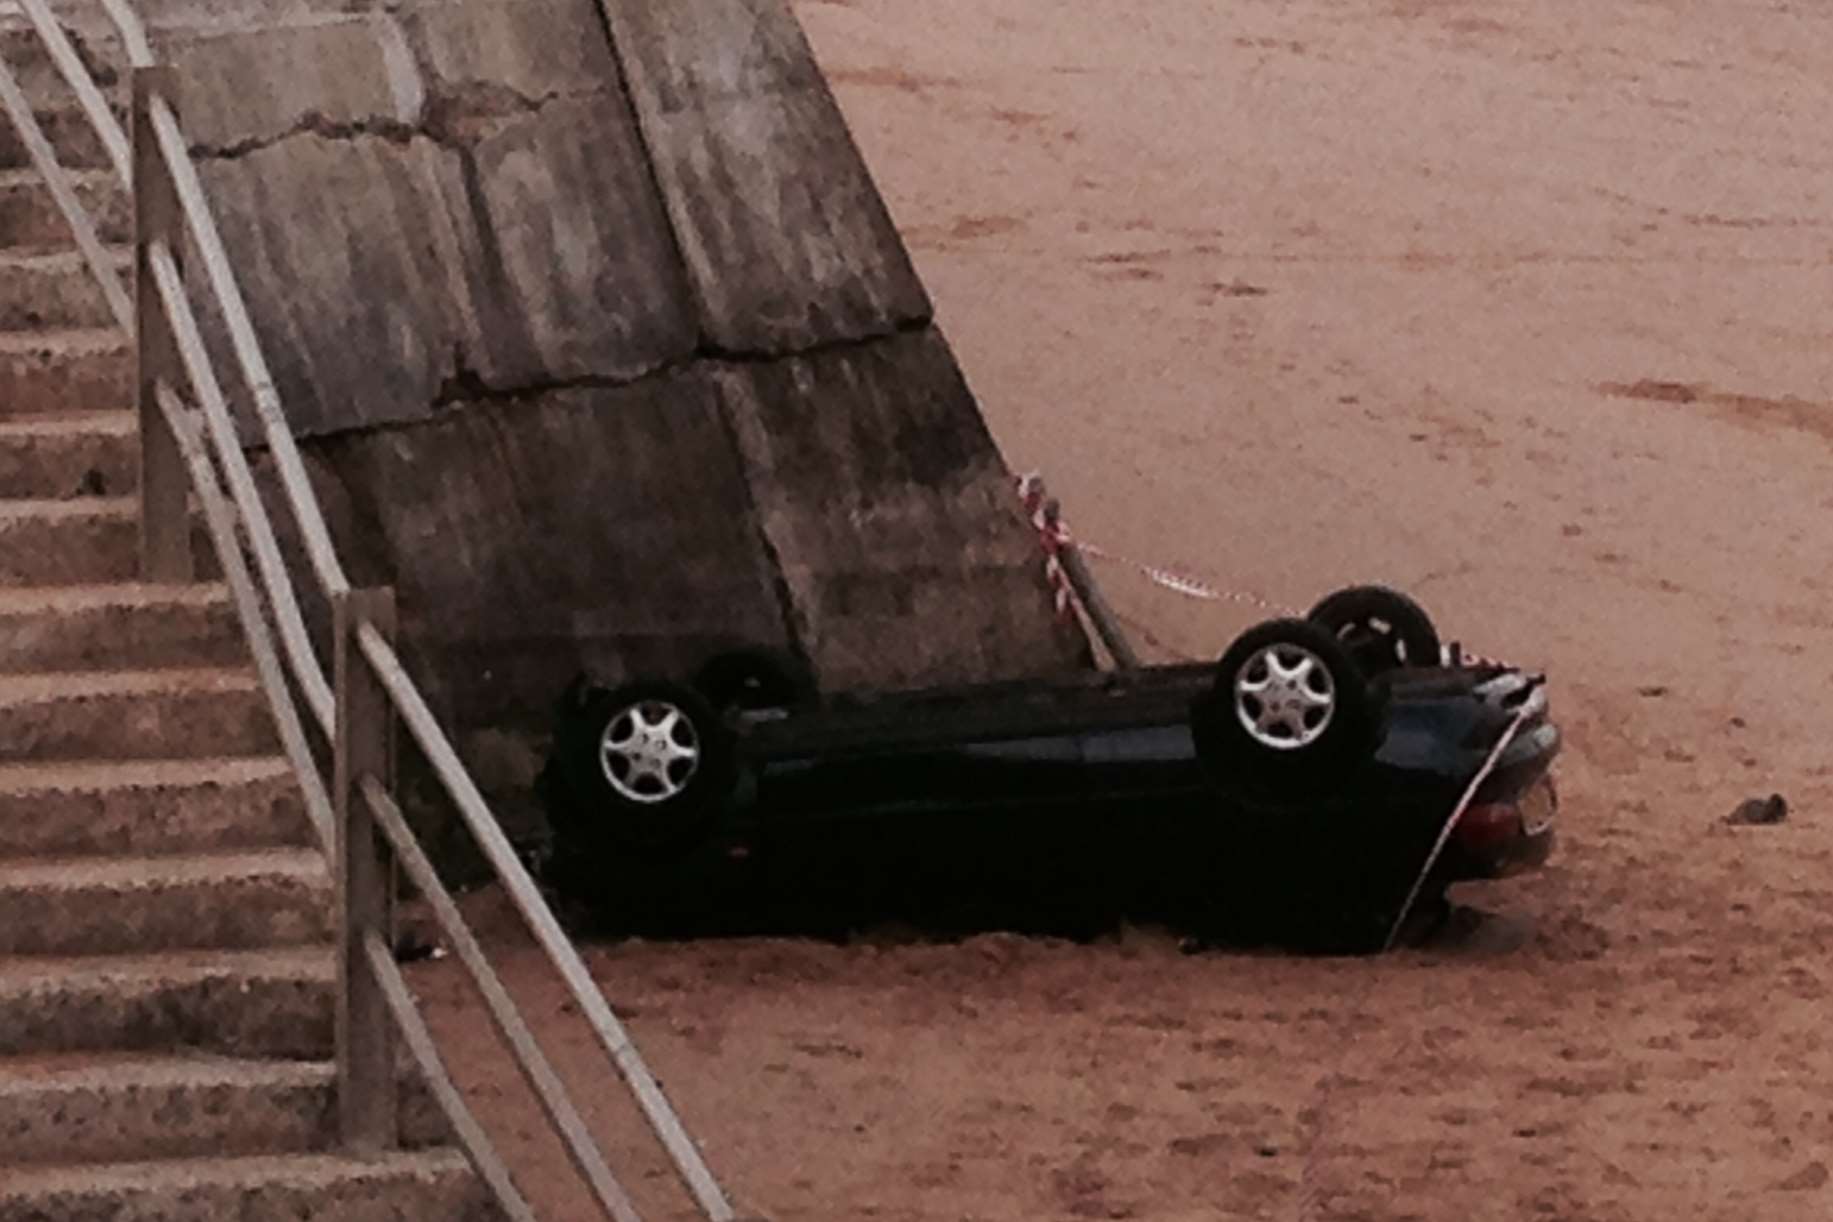 A car crashed through railings on to the beach in Ramsgate.